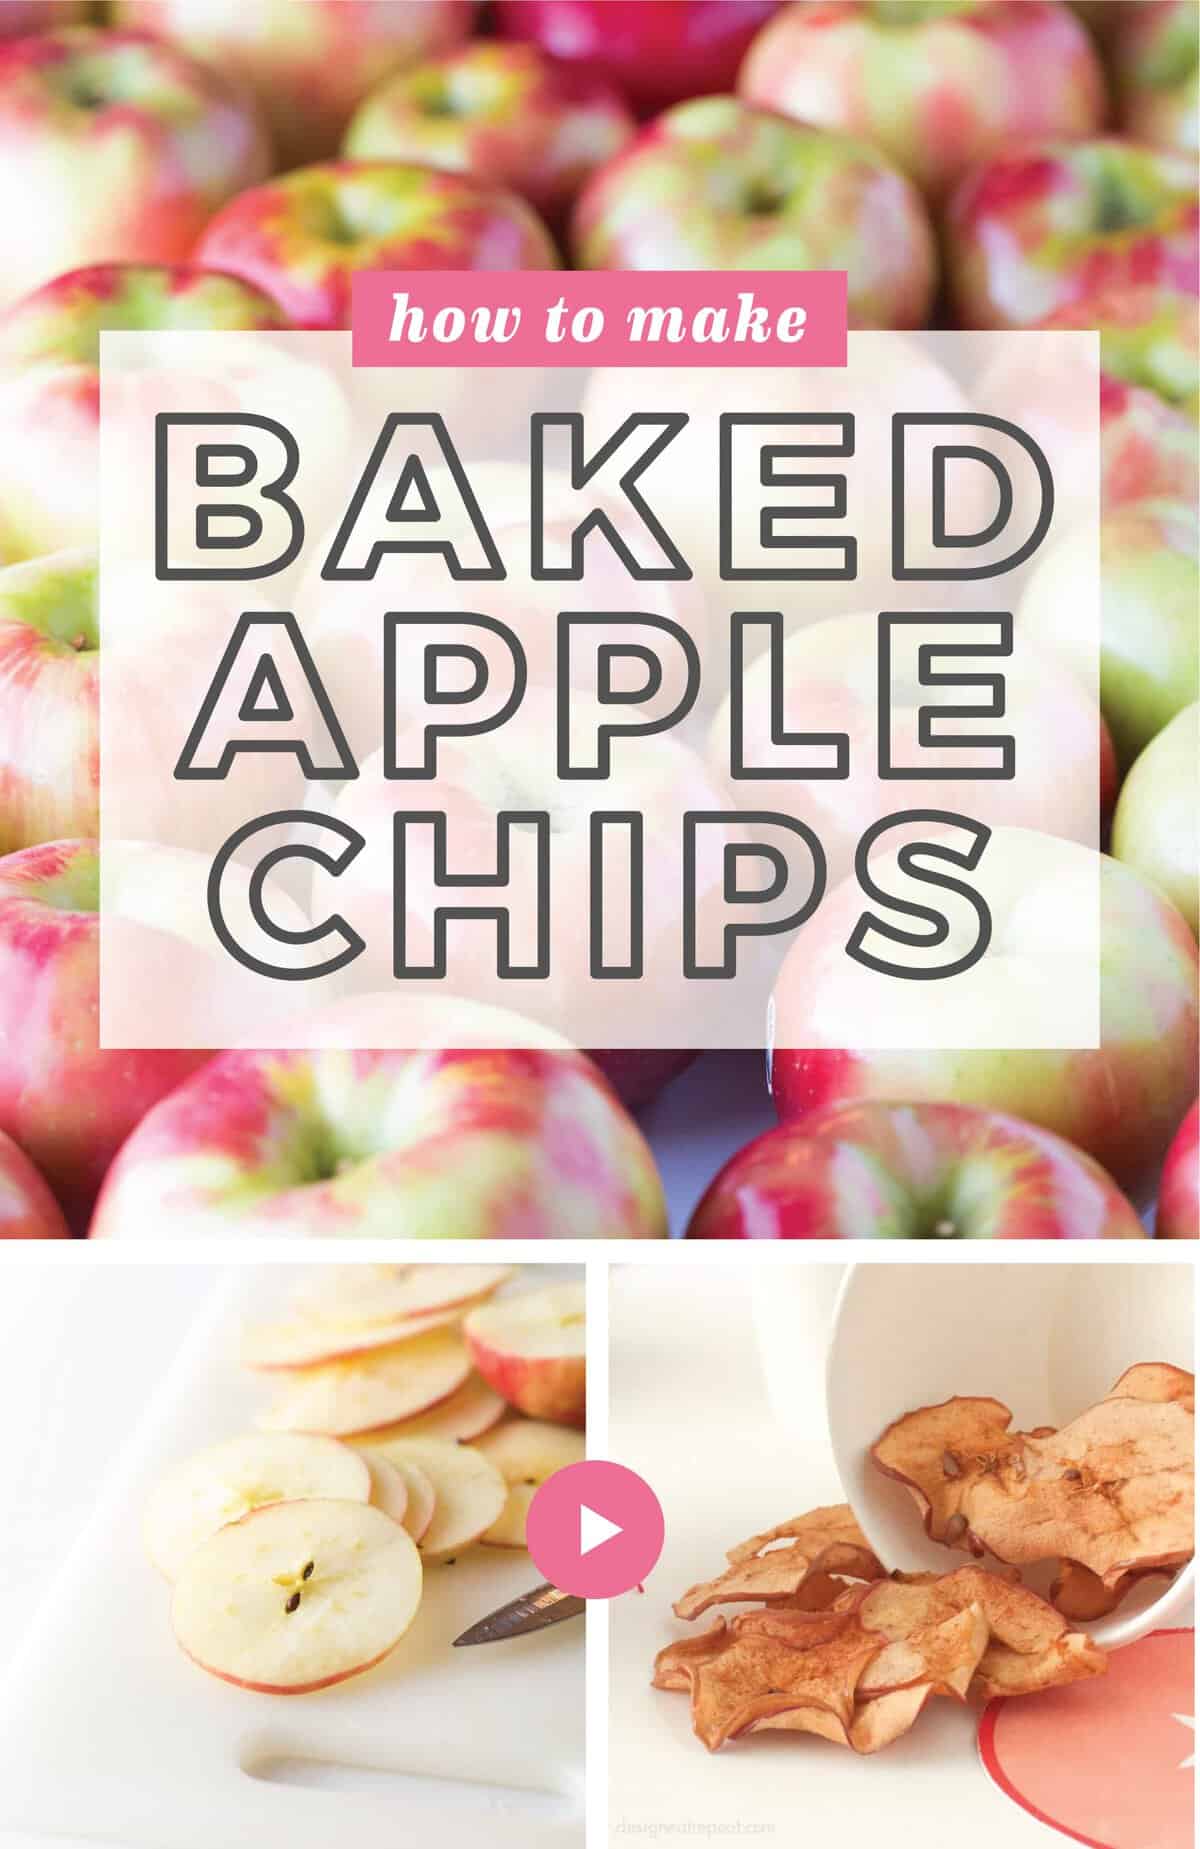 Learn how to make baked cinnamon apple chips using fresh apples and a little bit of cinnamon and sugar. Homemade baked apple chips are fun to make, a great way to use up apples, and are a healthy snack!